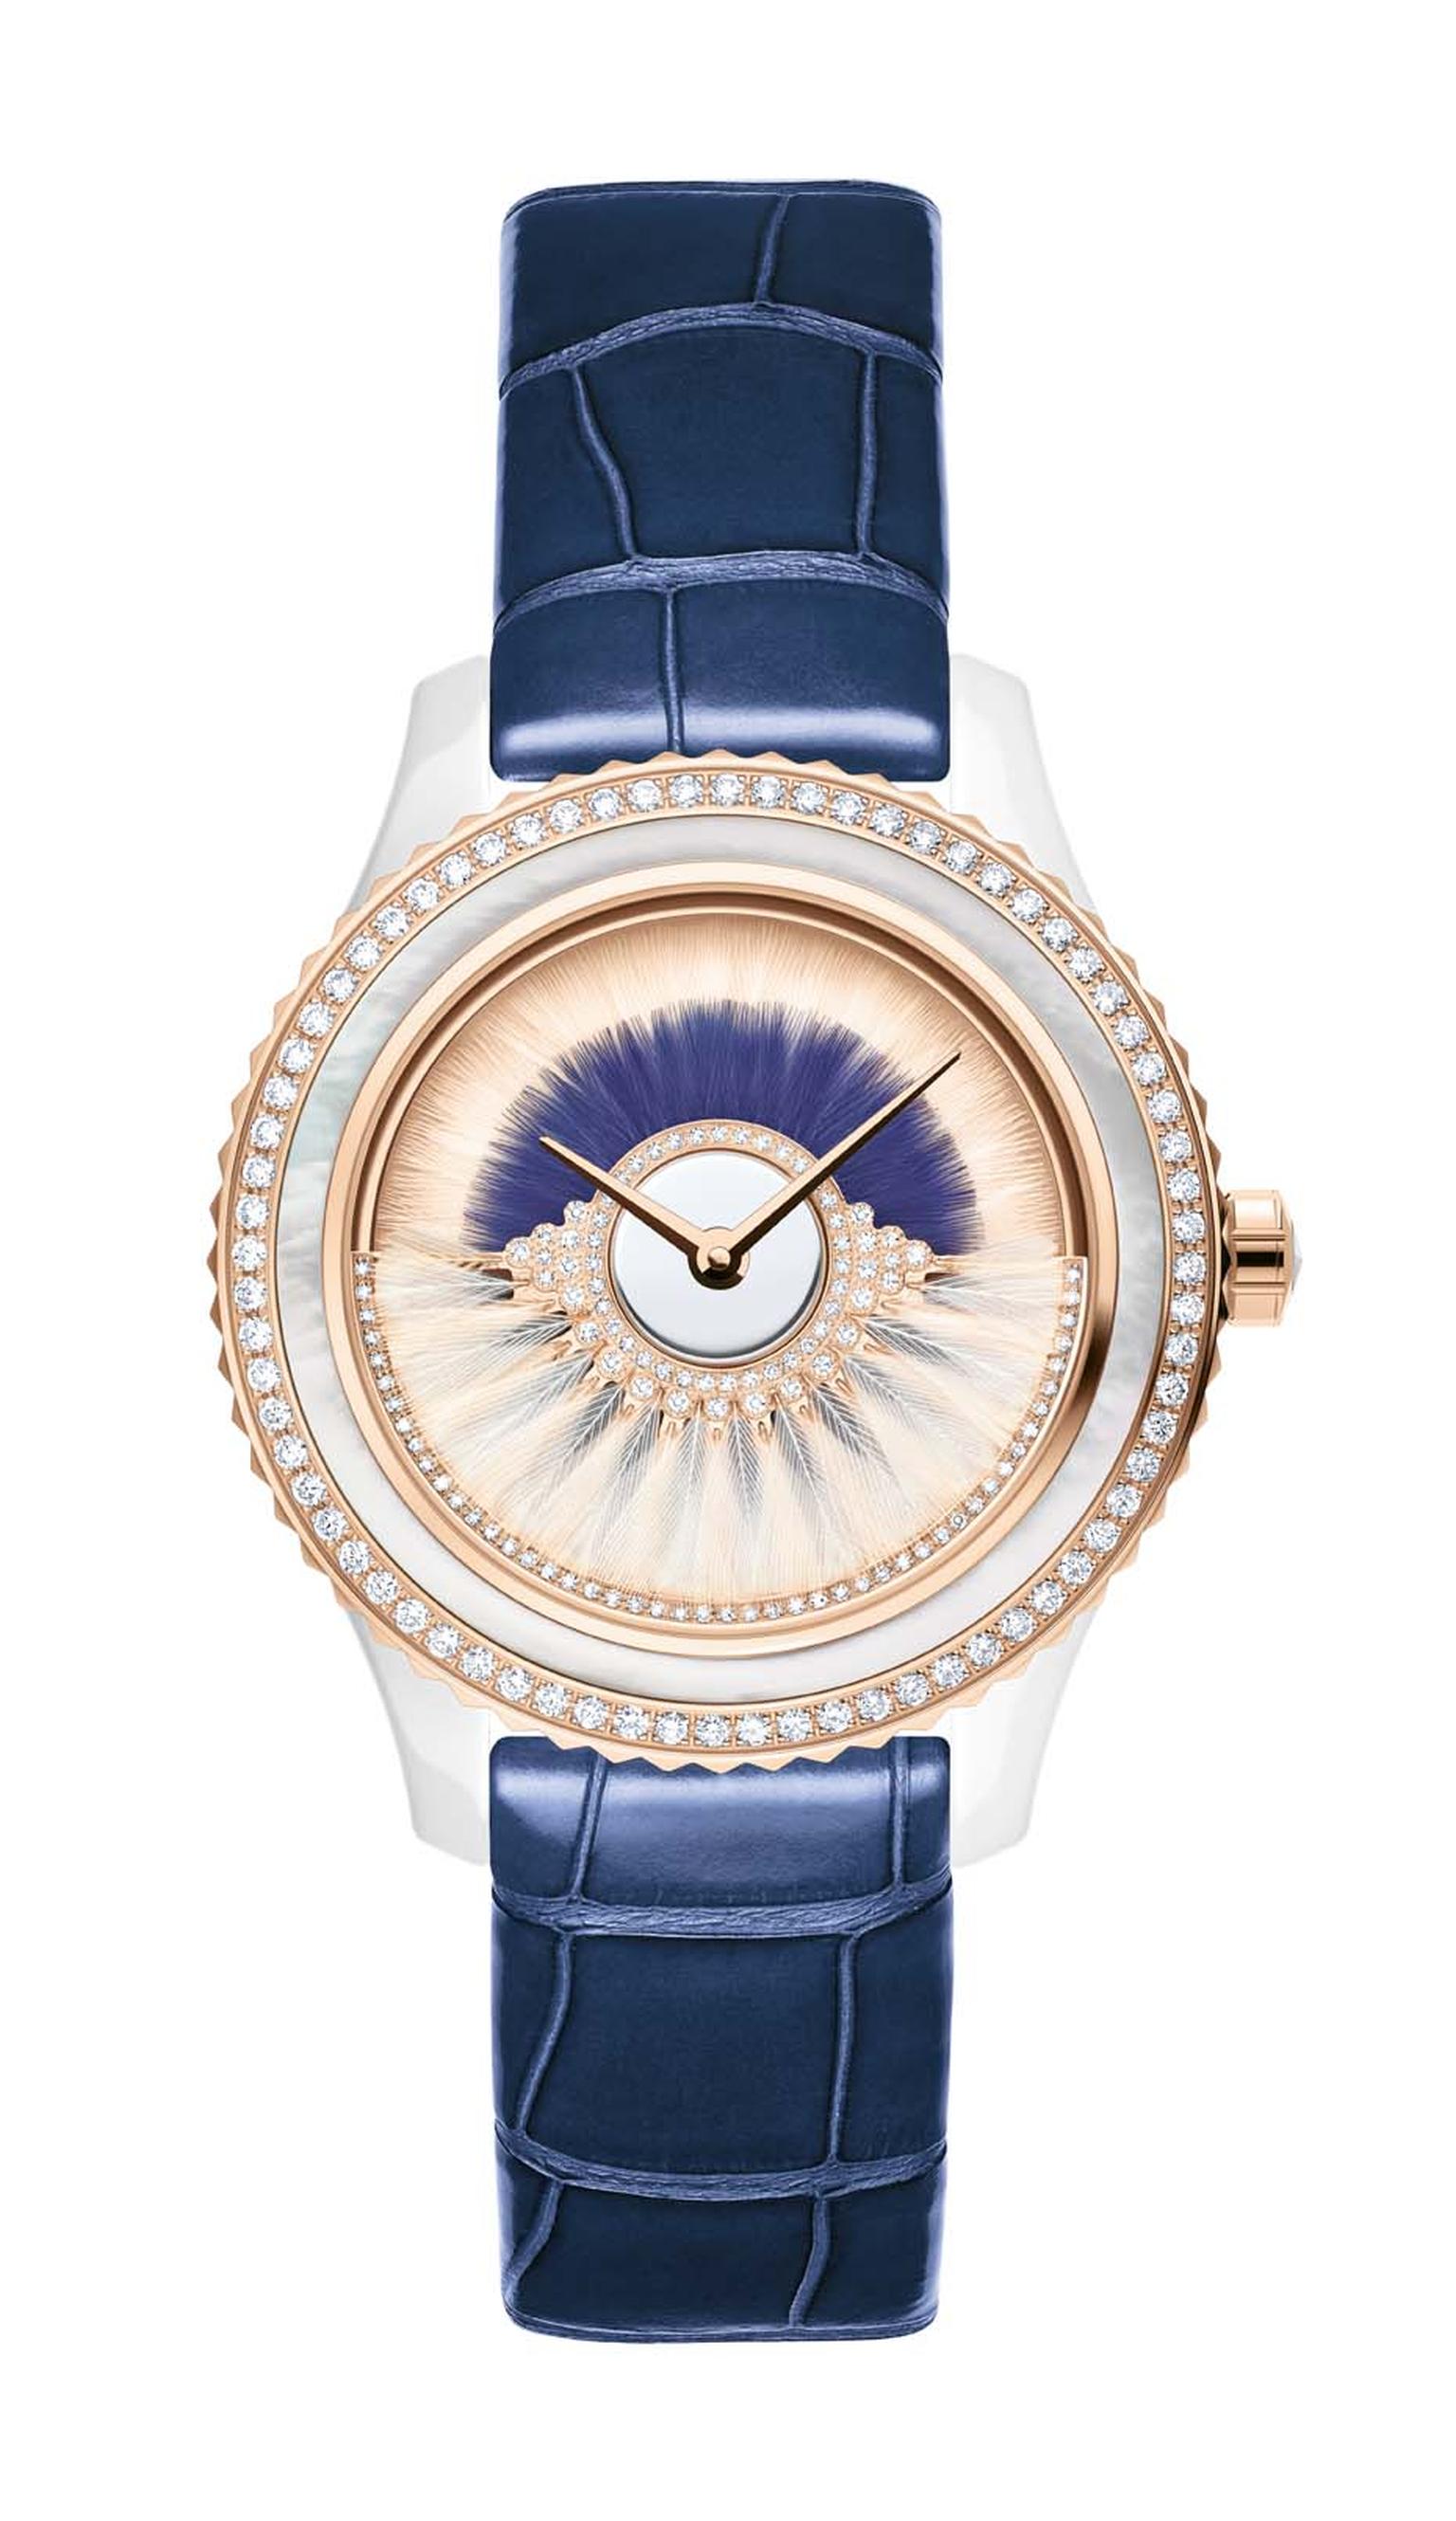 Dior VIII Grand Bal Cancan watch in a 38mm pink gold and ceramic case has a dial decorated with two rows of white and blue feather marquetry. The pink oscillating weight on the dial swings back and forwards and is set with diamonds and white feathers. Lim